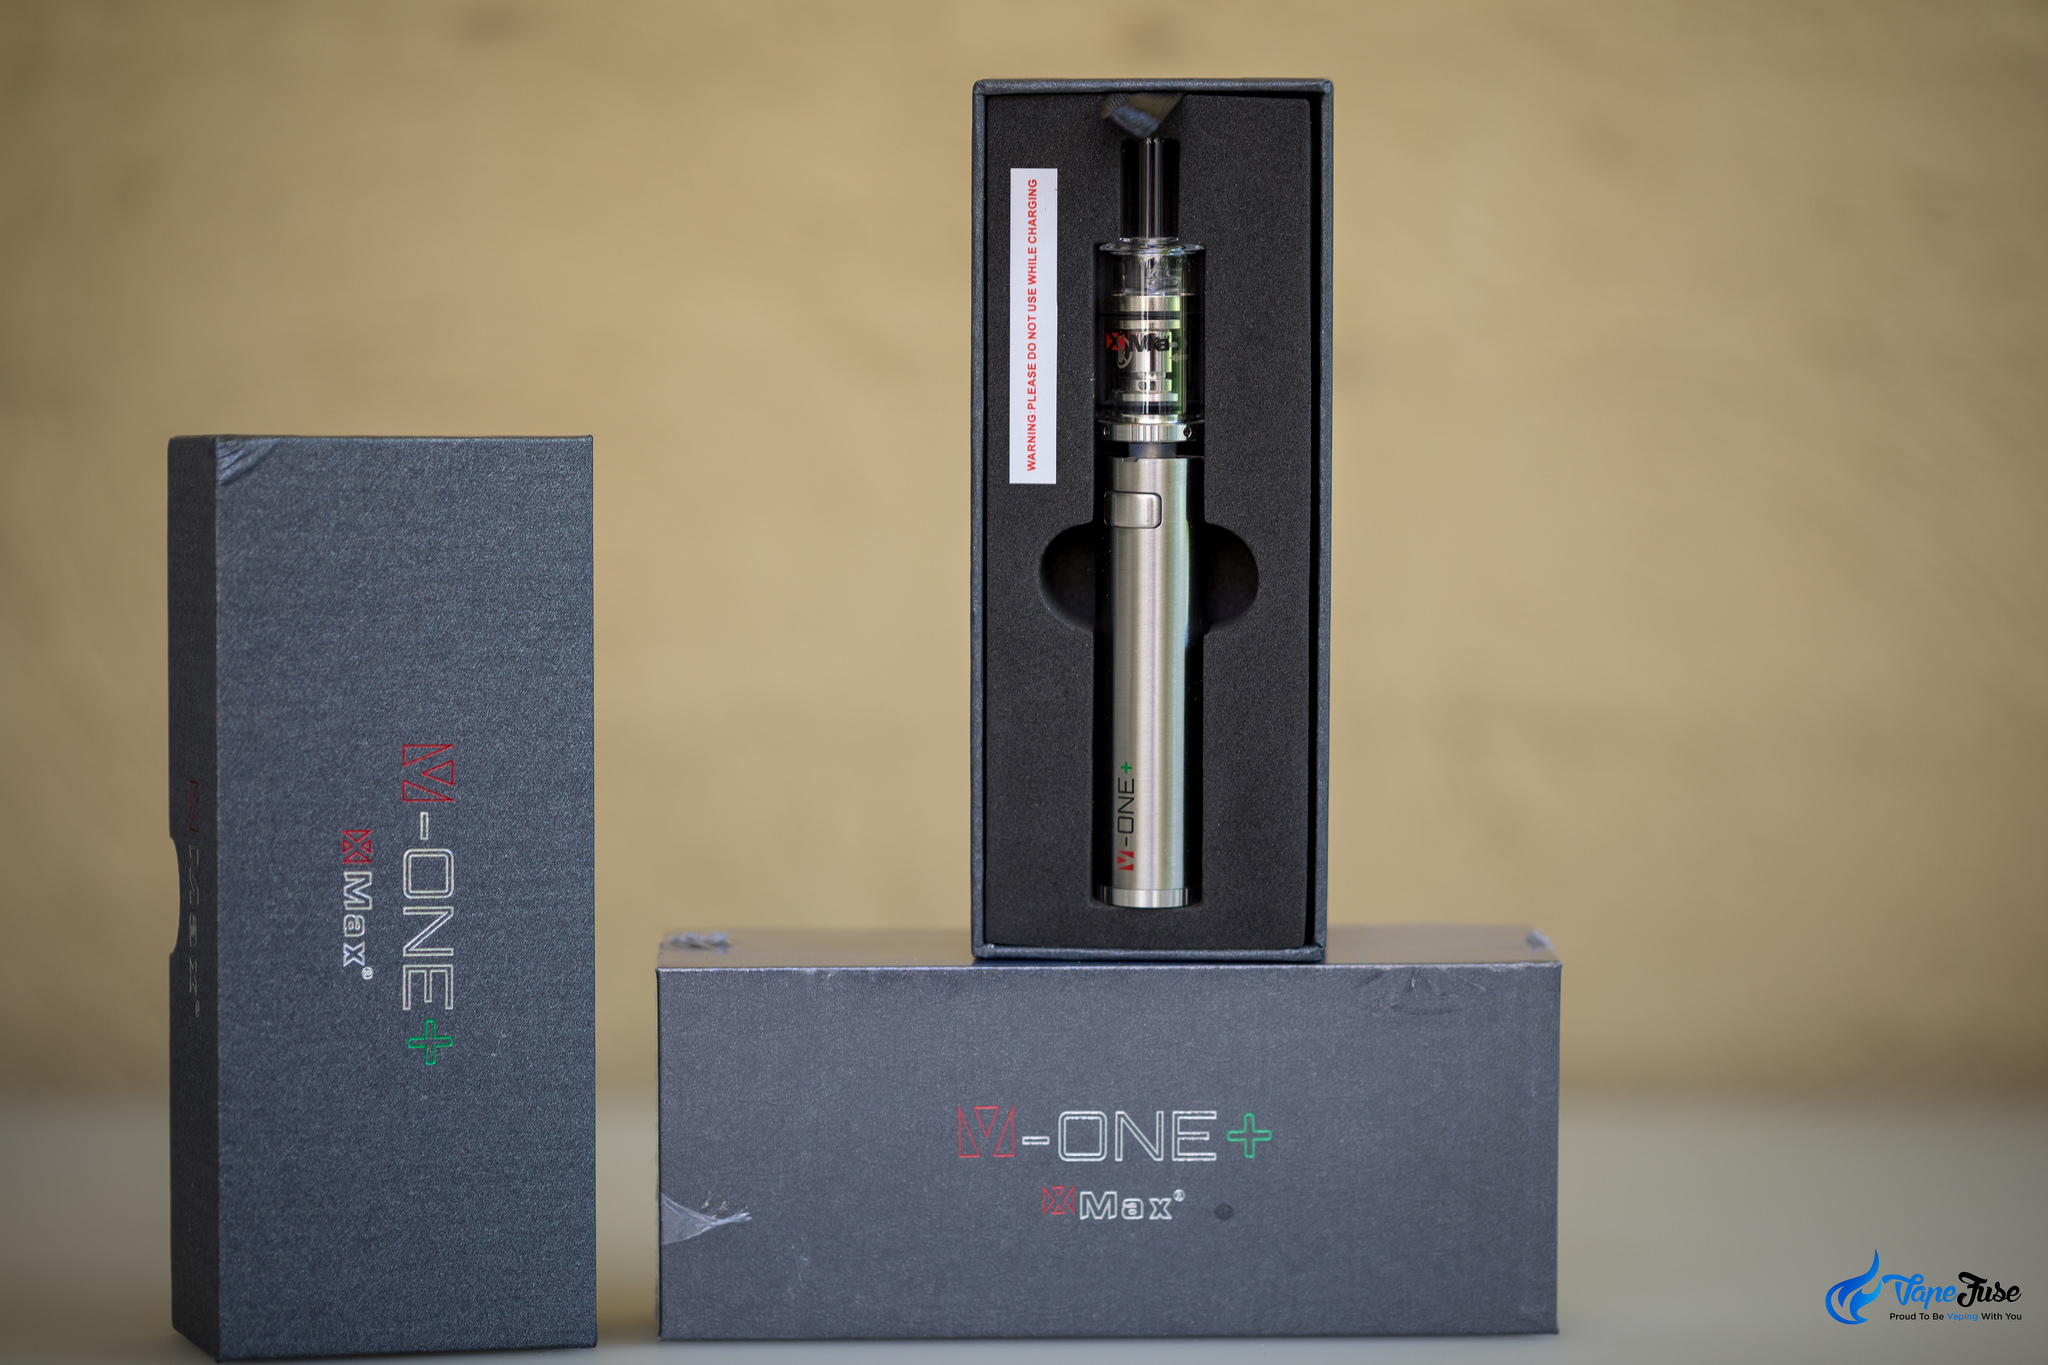 X Max V-One Plus Concentrate Vaporizer in the box